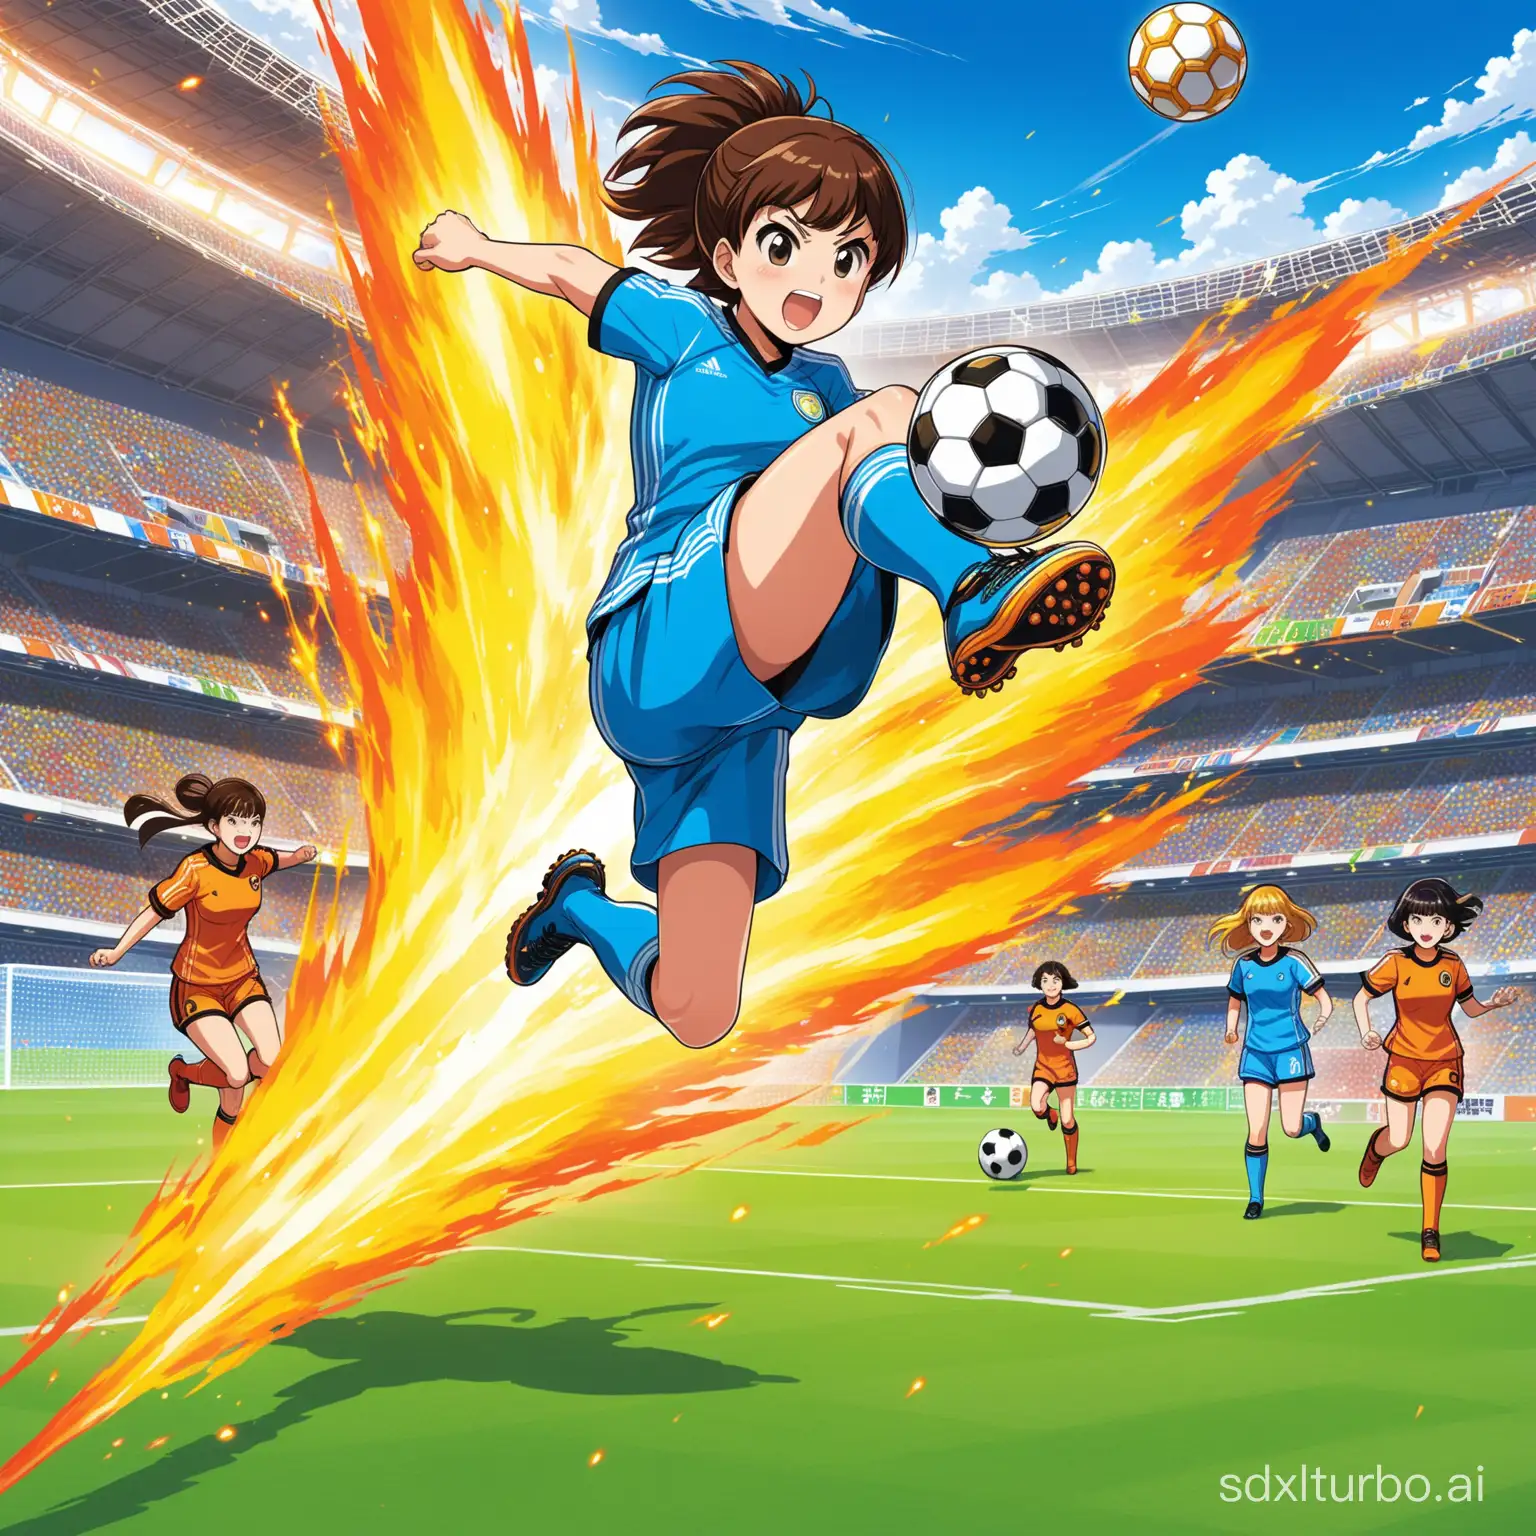 Group of multiple girls,(multiple girls),(group of girls),(many girls),All Characters from captain Tsubasa anime teamed,play super shot soccer like ultimate blast shot,(supershot soccer),(play ultimate soccer),(superstrike soccer),(kick off),jump and kick to the ball,fire shtorm around the flying ball kicking,tsunami going into the ball shooting,ultimate super strike ball,fire shot,double twin shot to the ball,jumping to the ball,blast kick to the ball,super ultimate blast shot,firestorm.